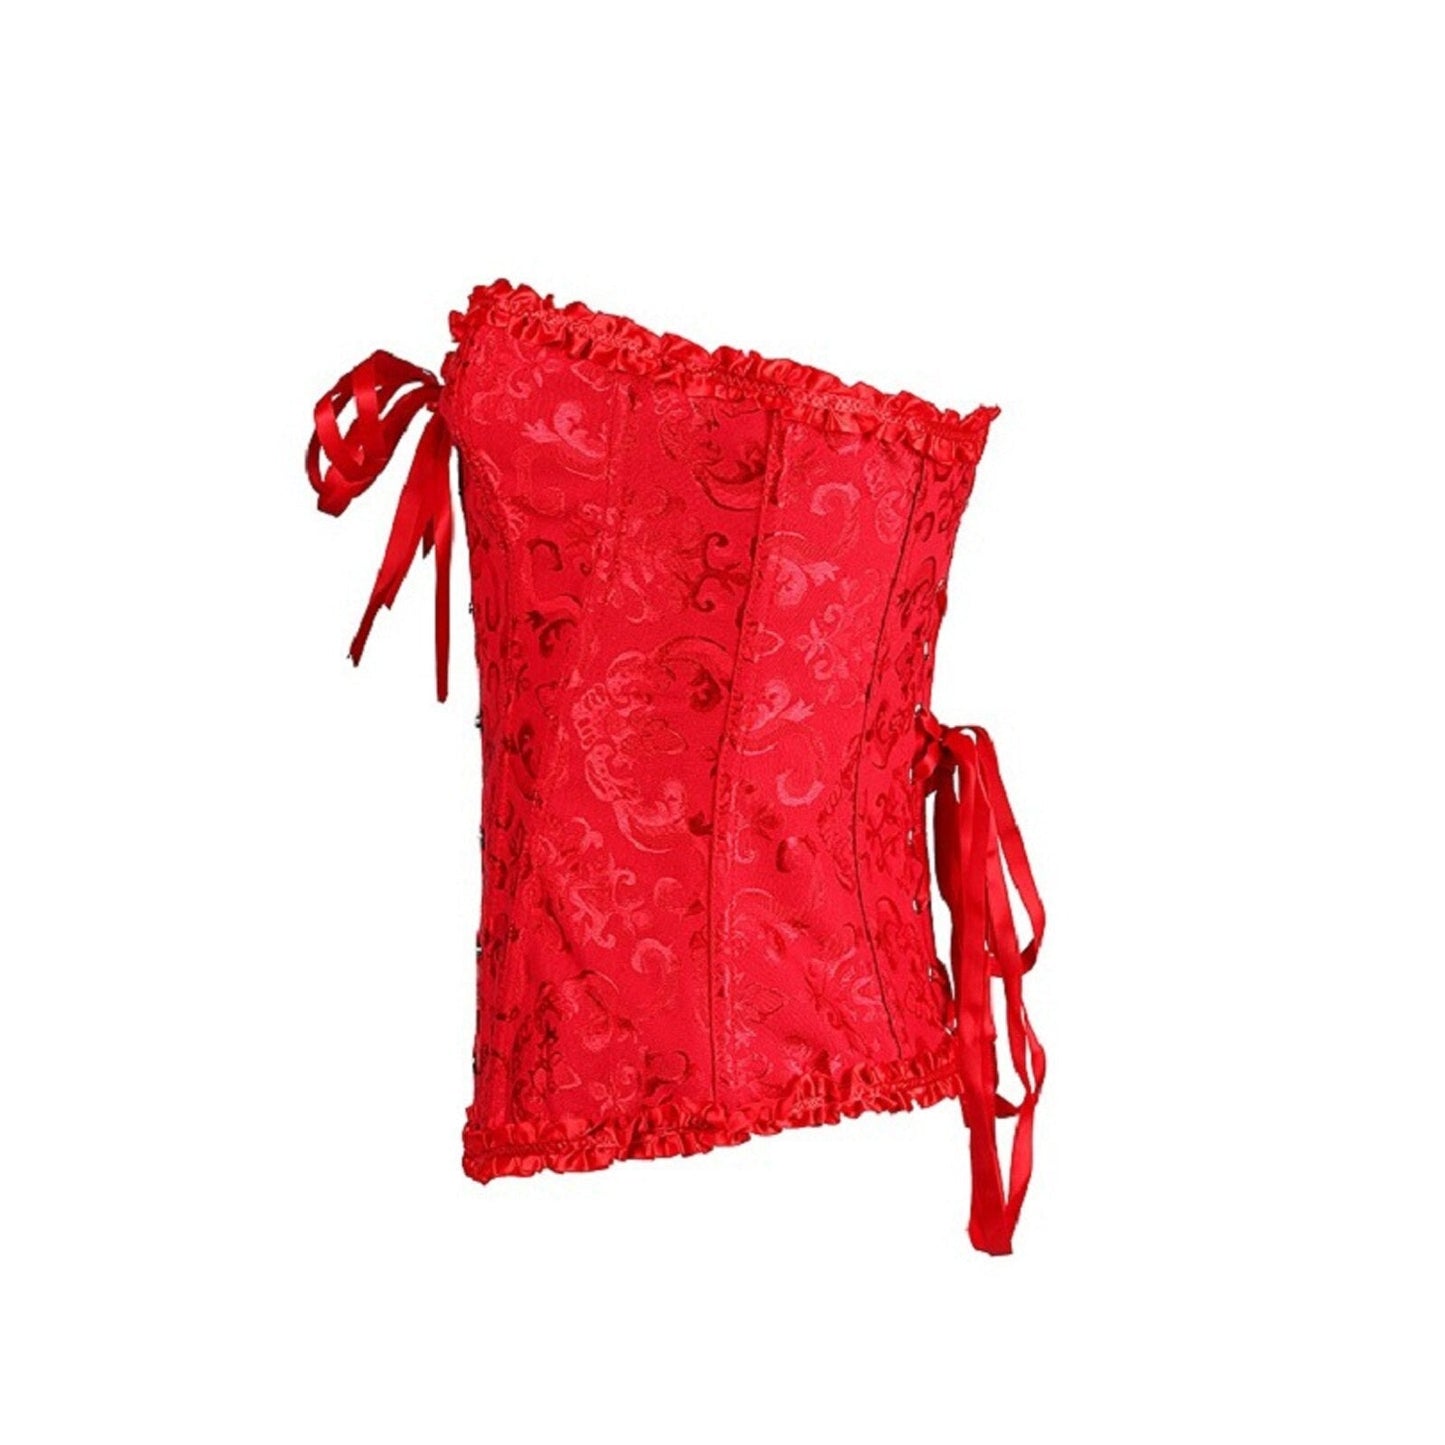 Corset Sexy Rouge Éclatant Everleigh,  corset femme obese